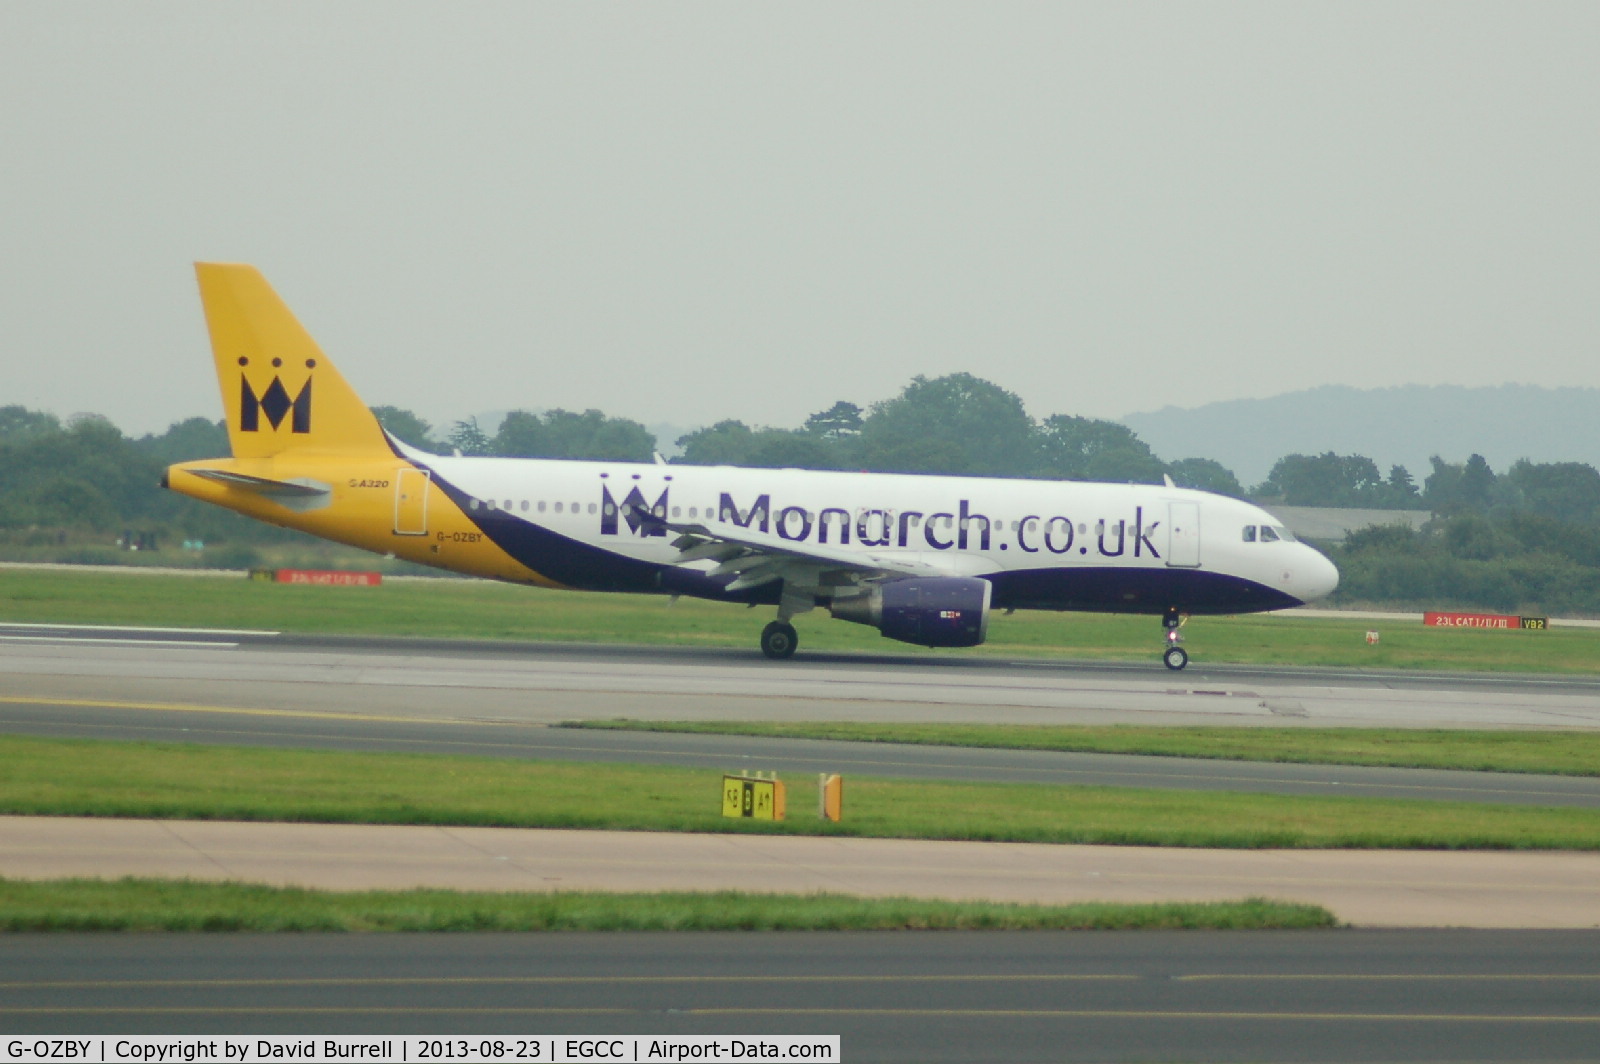 G-OZBY, 2000 Airbus A320-214 C/N 1320, Monarch Airbus A320-214 landed at Manchester Airport.